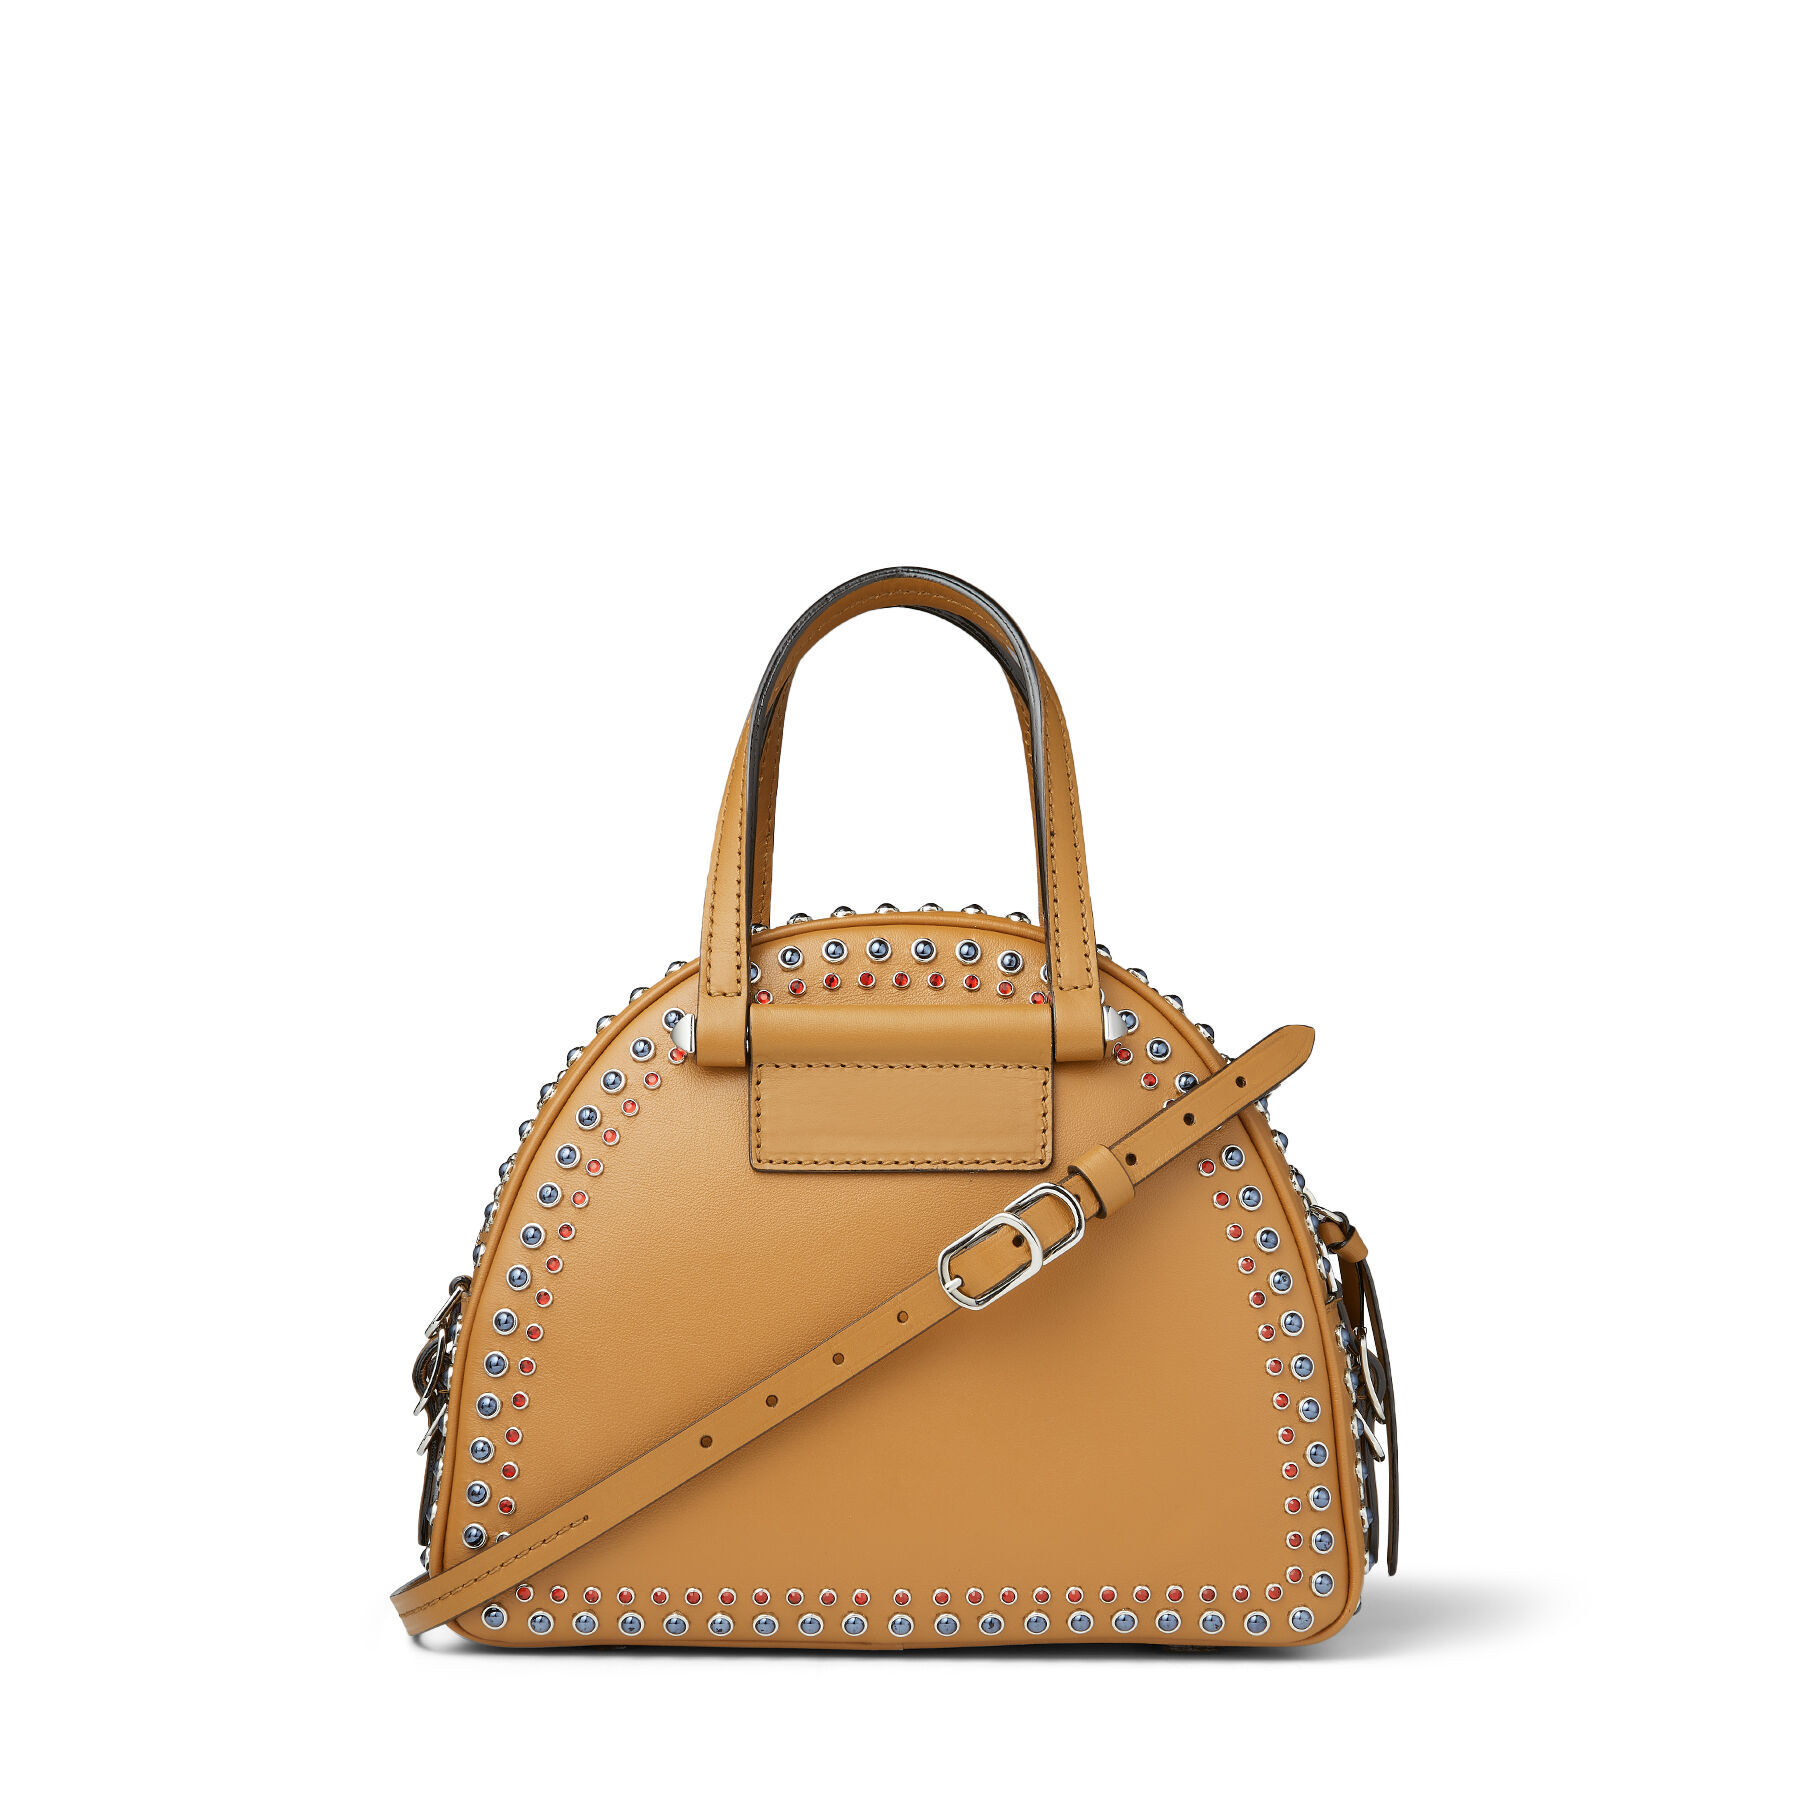 Cuoio Calf Leather Bowling Handbag with Cabouchon Studs | VARENNE